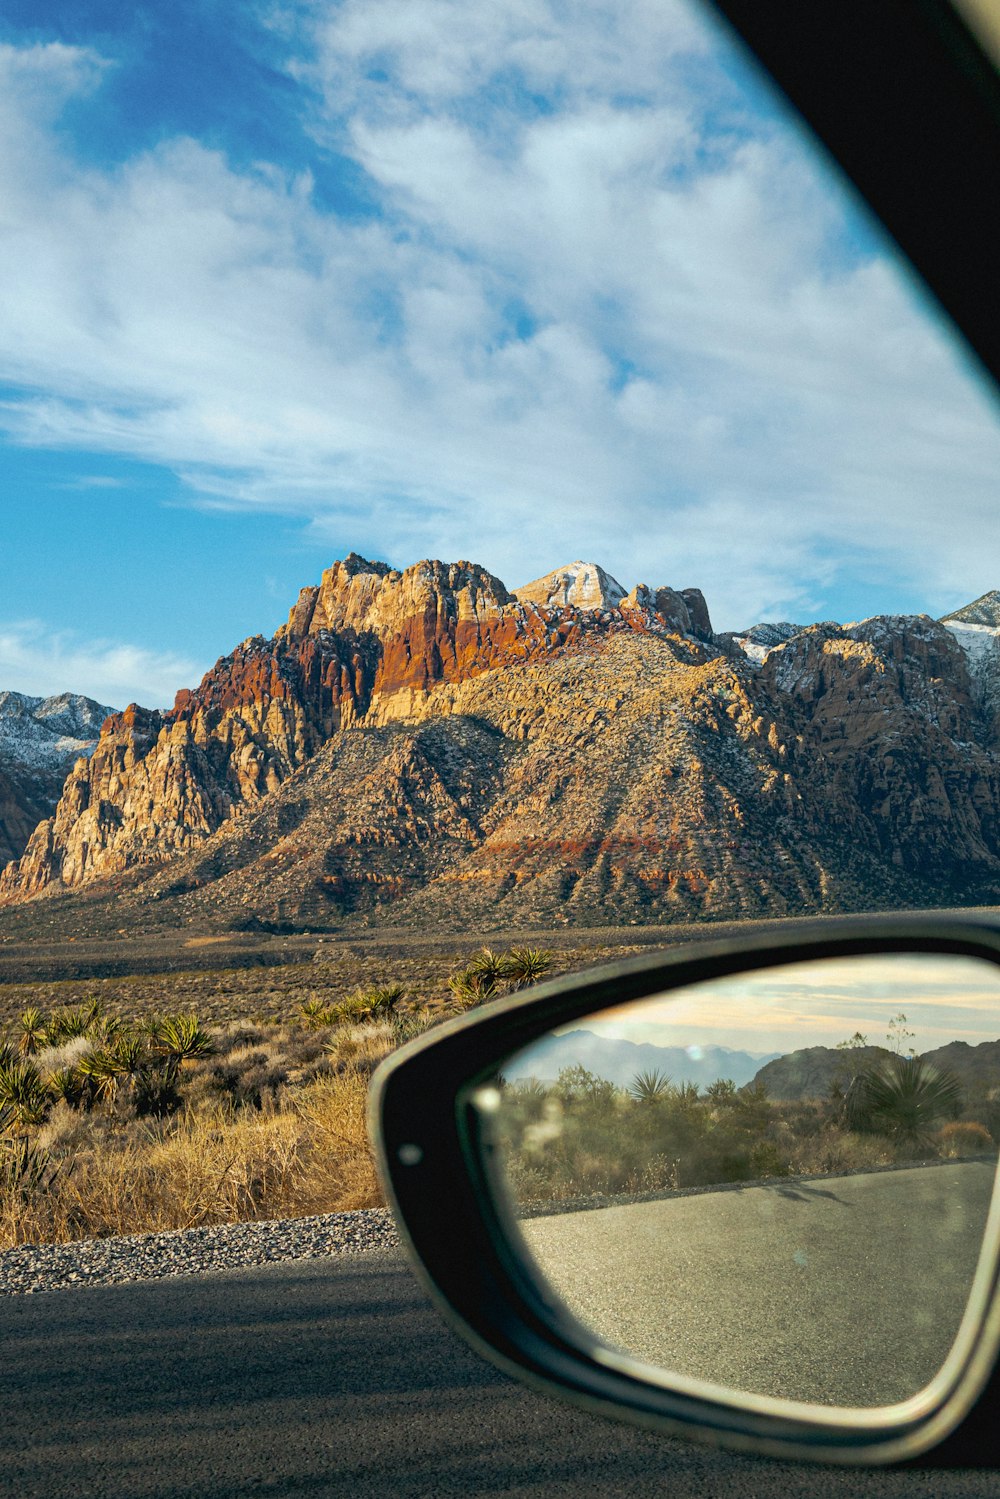 a view of a mountain range from a car's side view mirror